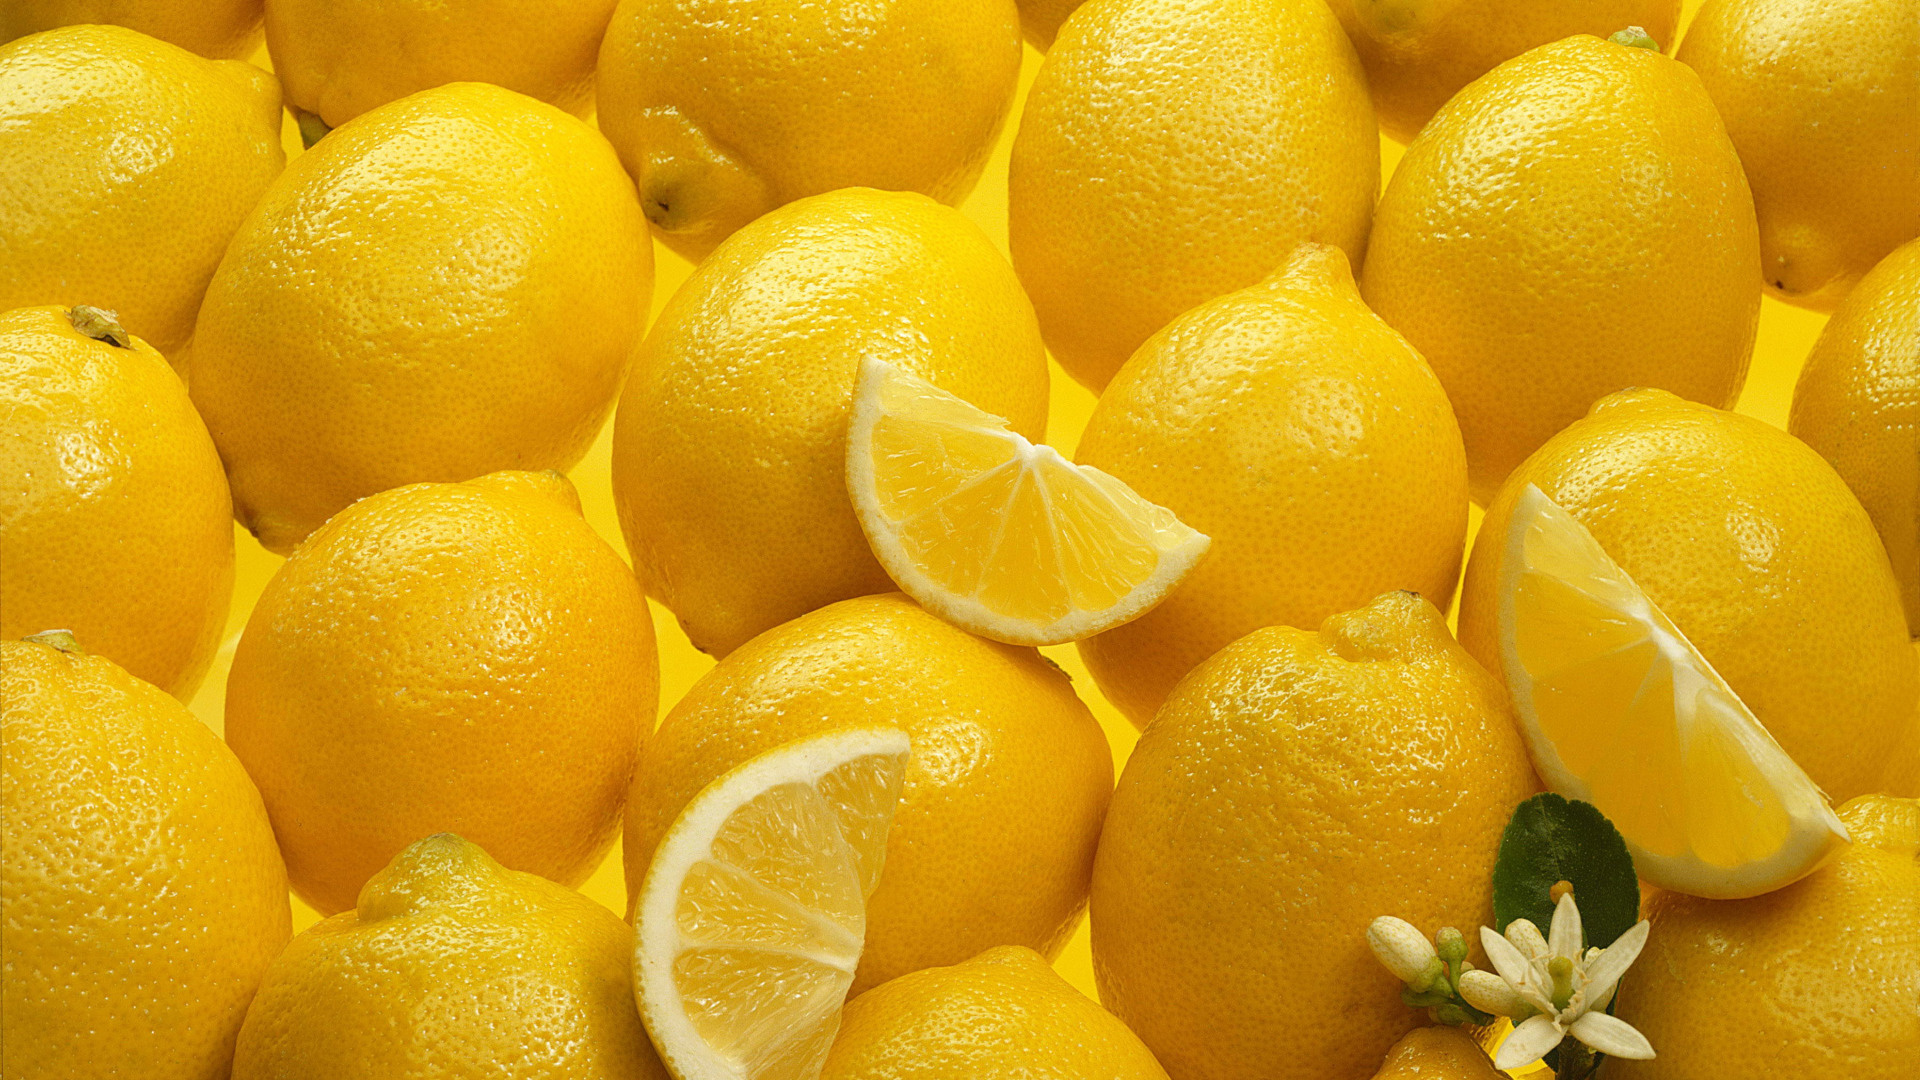 Lemon: A small, egg-shaped, edible citrus fruit with a yellow rind. 1920x1080 Full HD Wallpaper.